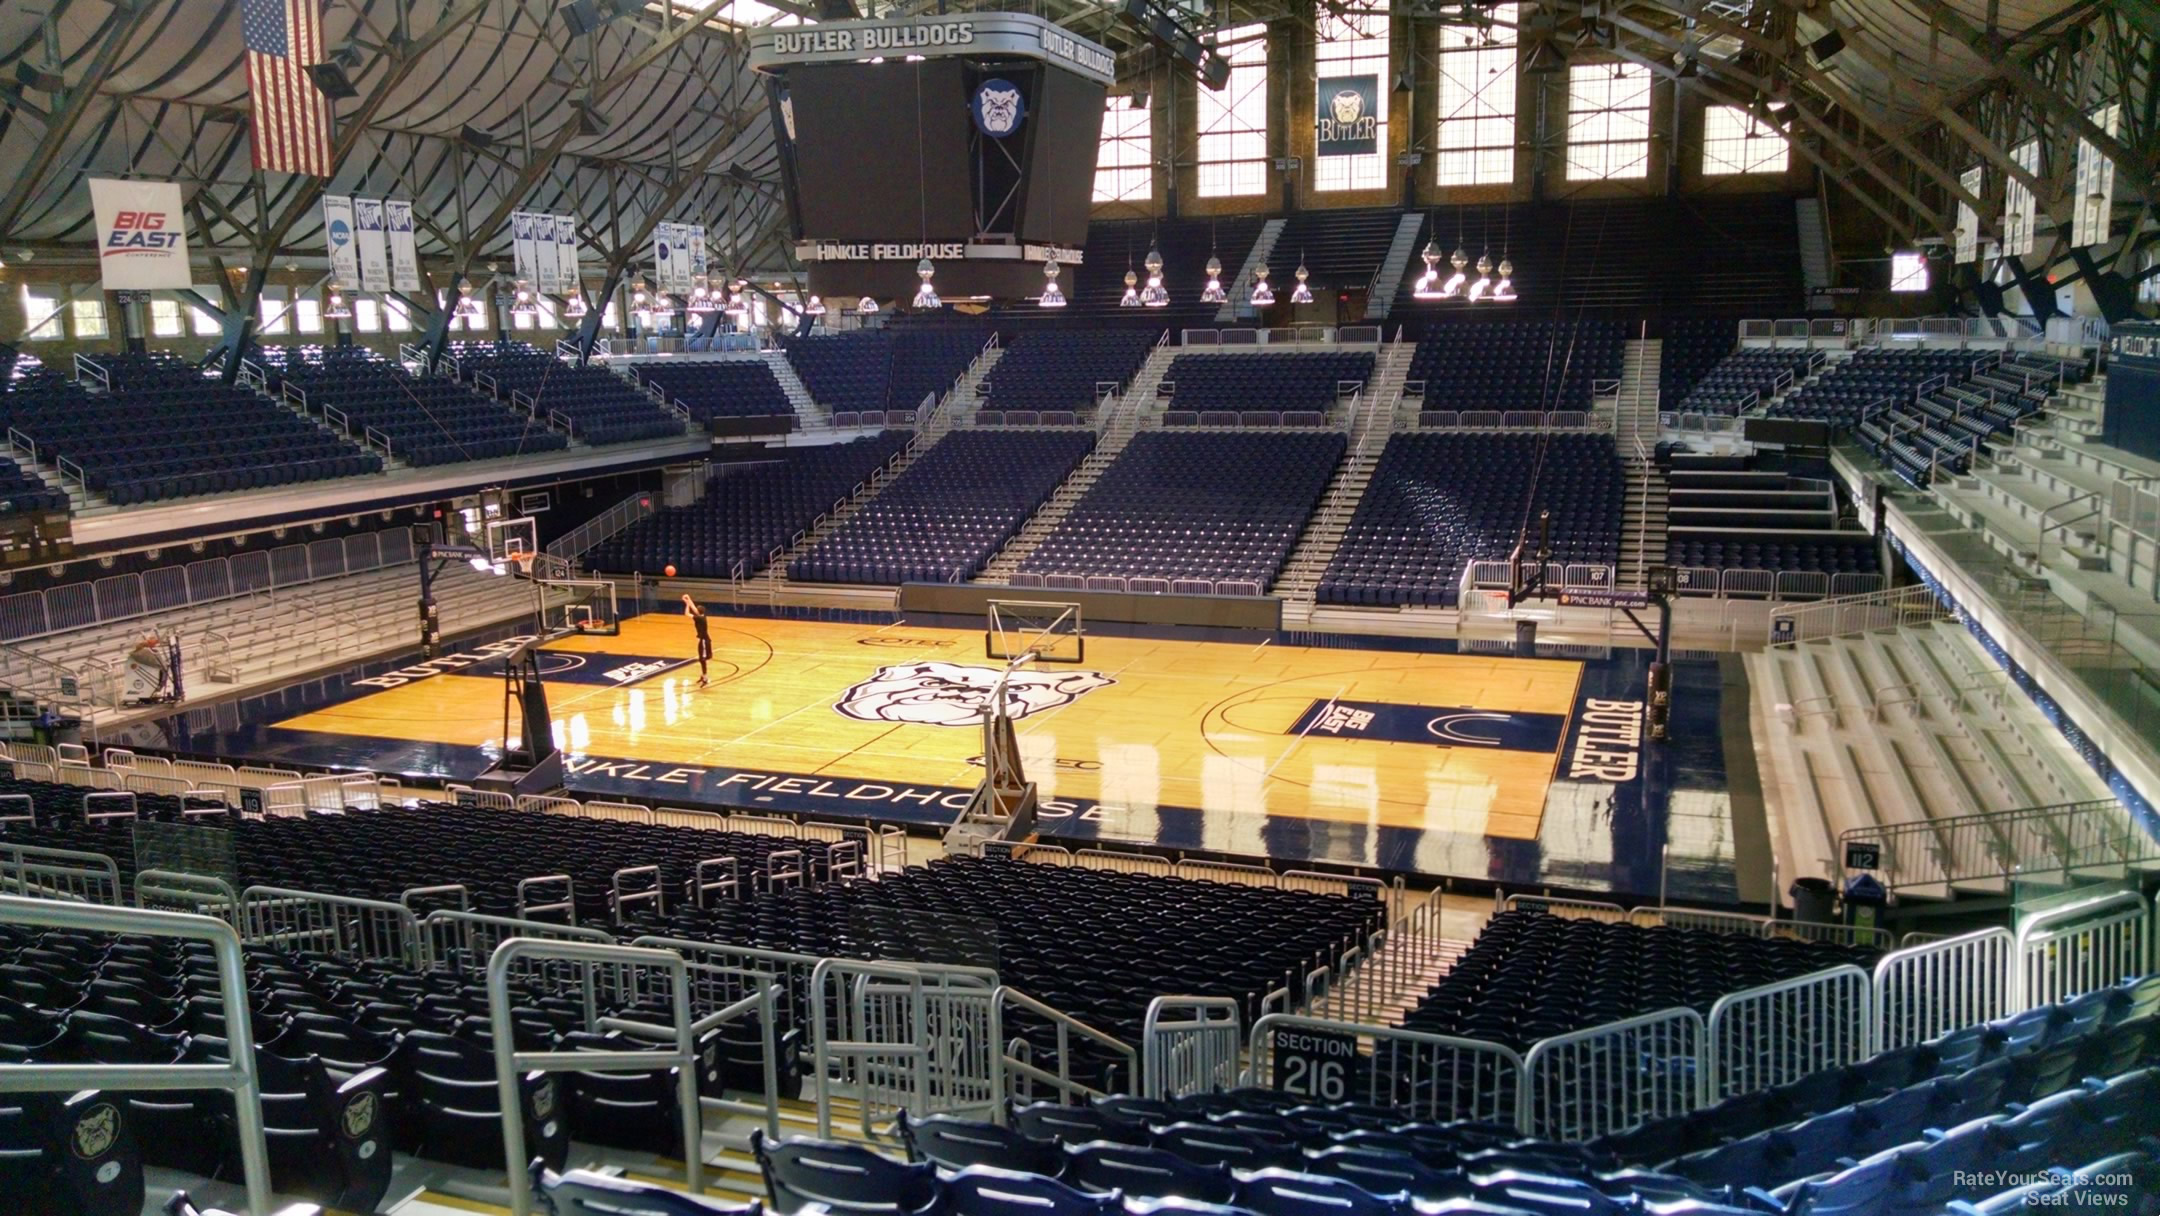 section 216, row 10 seat view  - hinkle fieldhouse